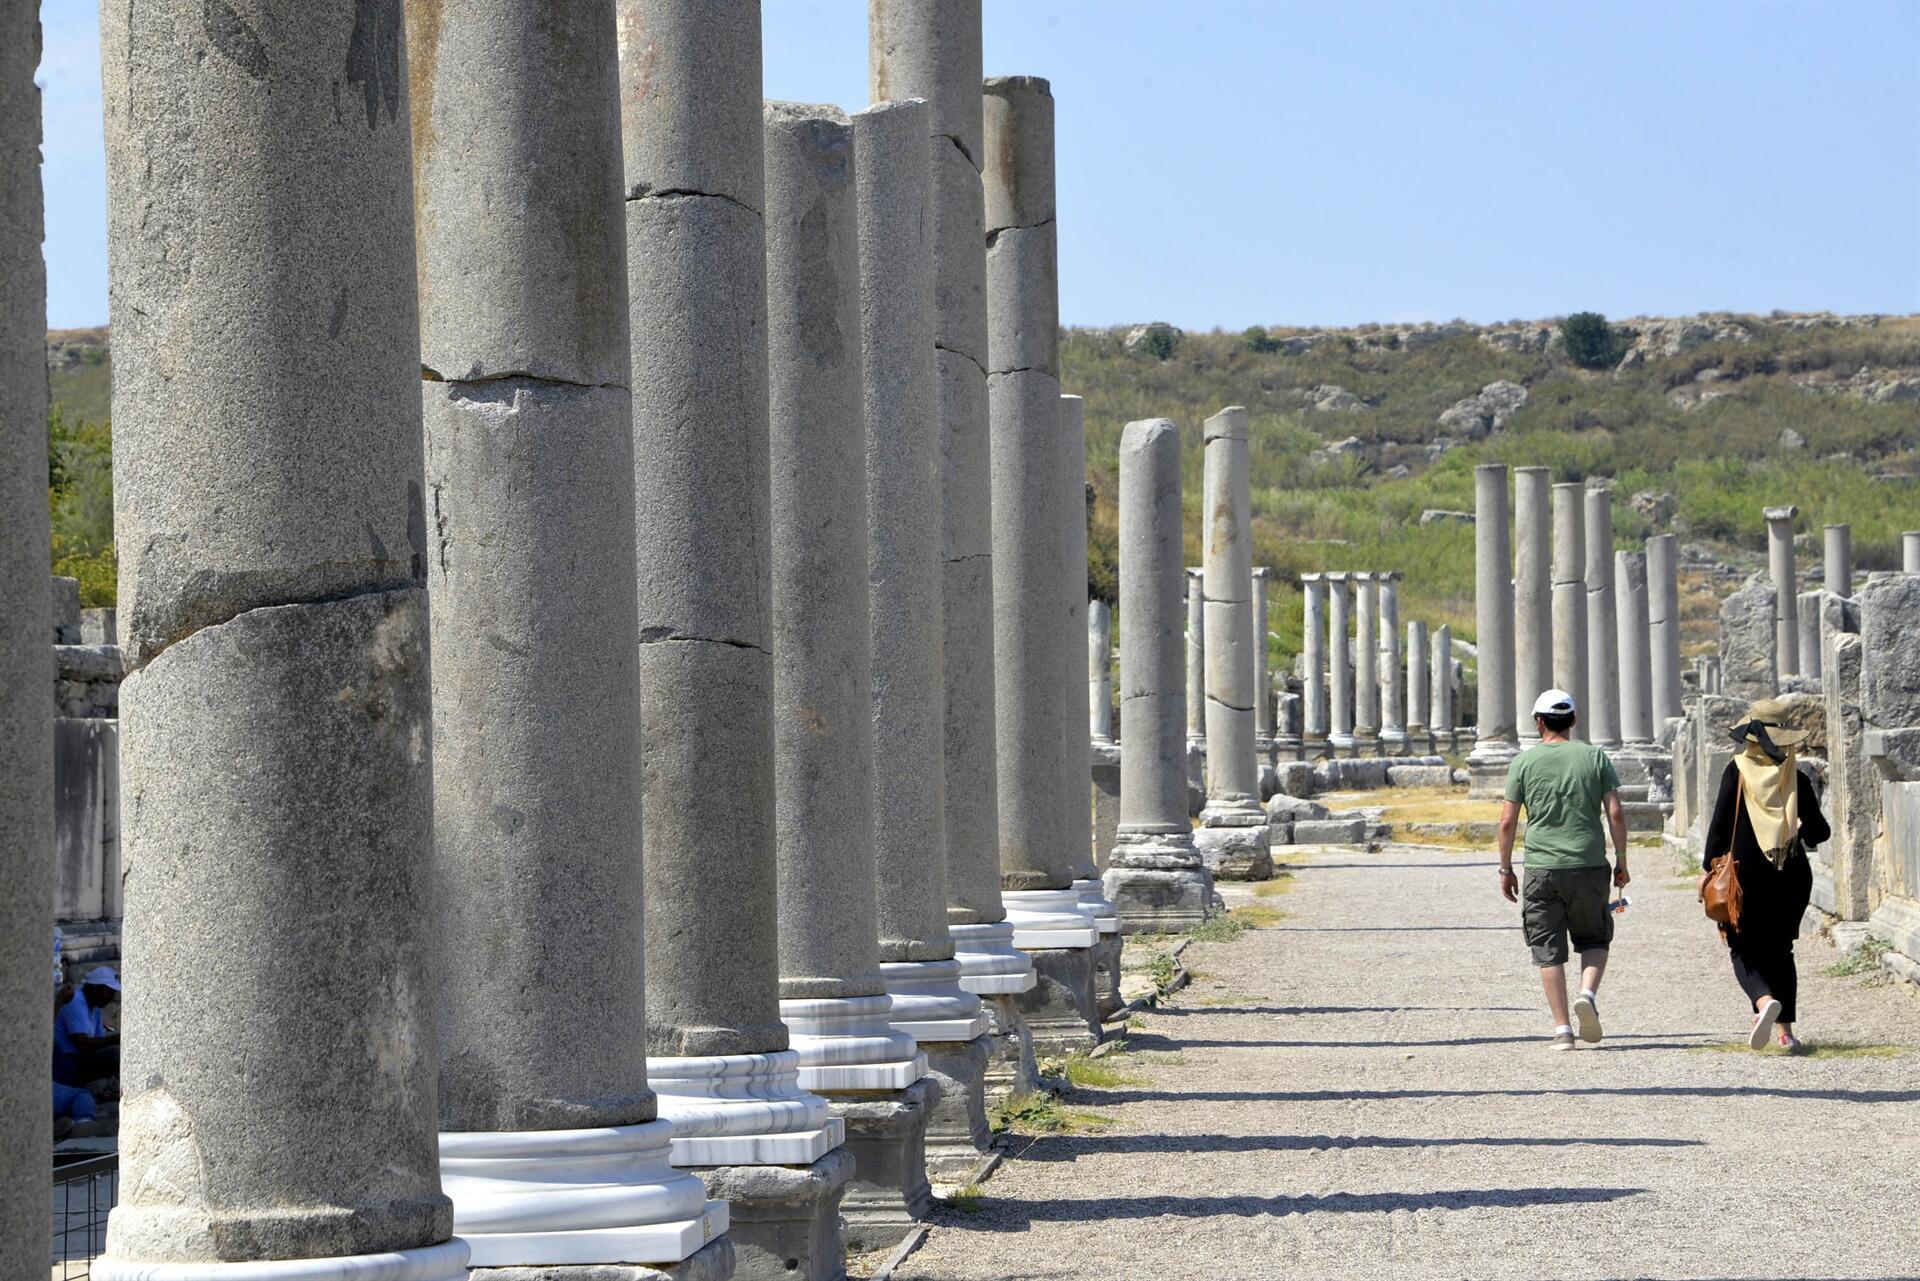 Campaign for Pergeâ€™s columns kicked off